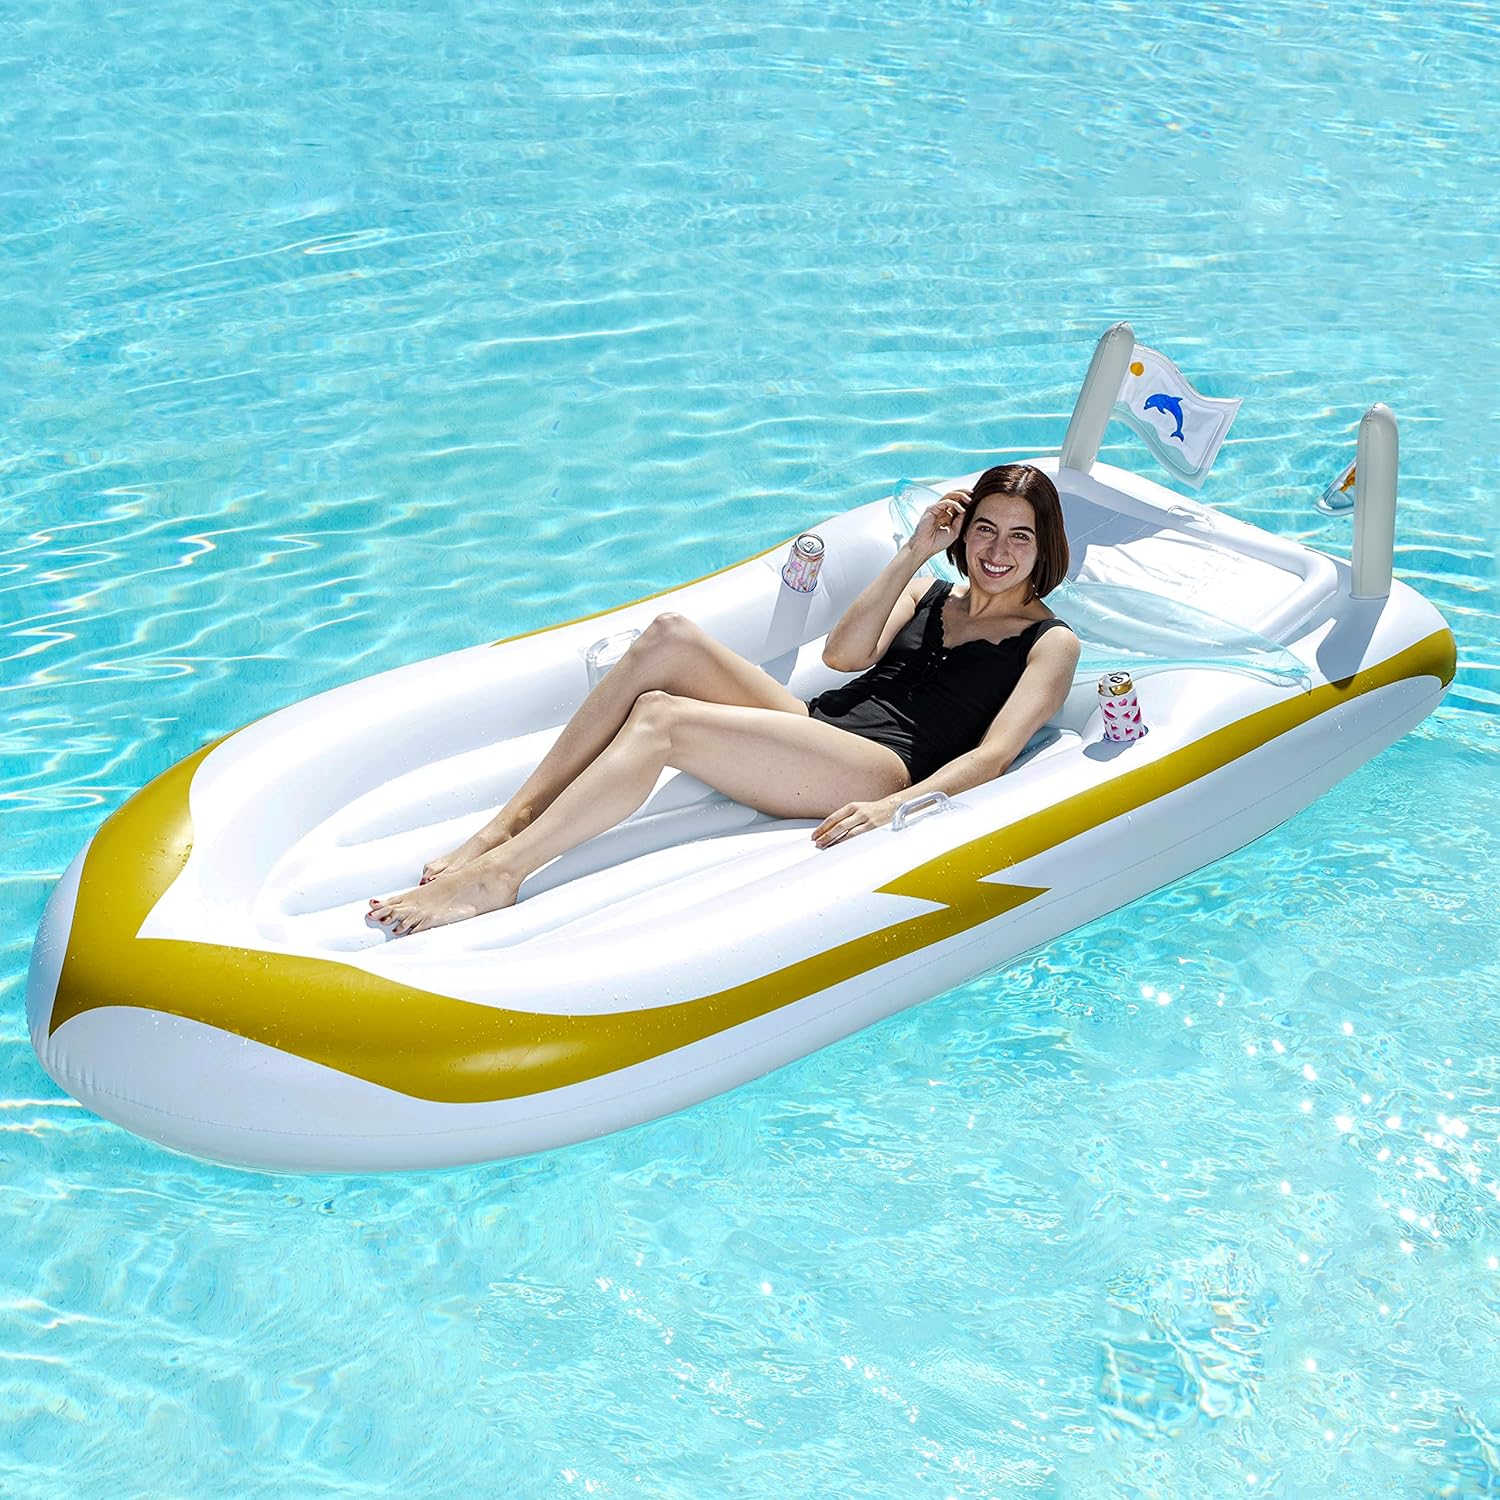 Sloosh Luxury Inflatable Yacht Boat Pool Raft with Cooler Review